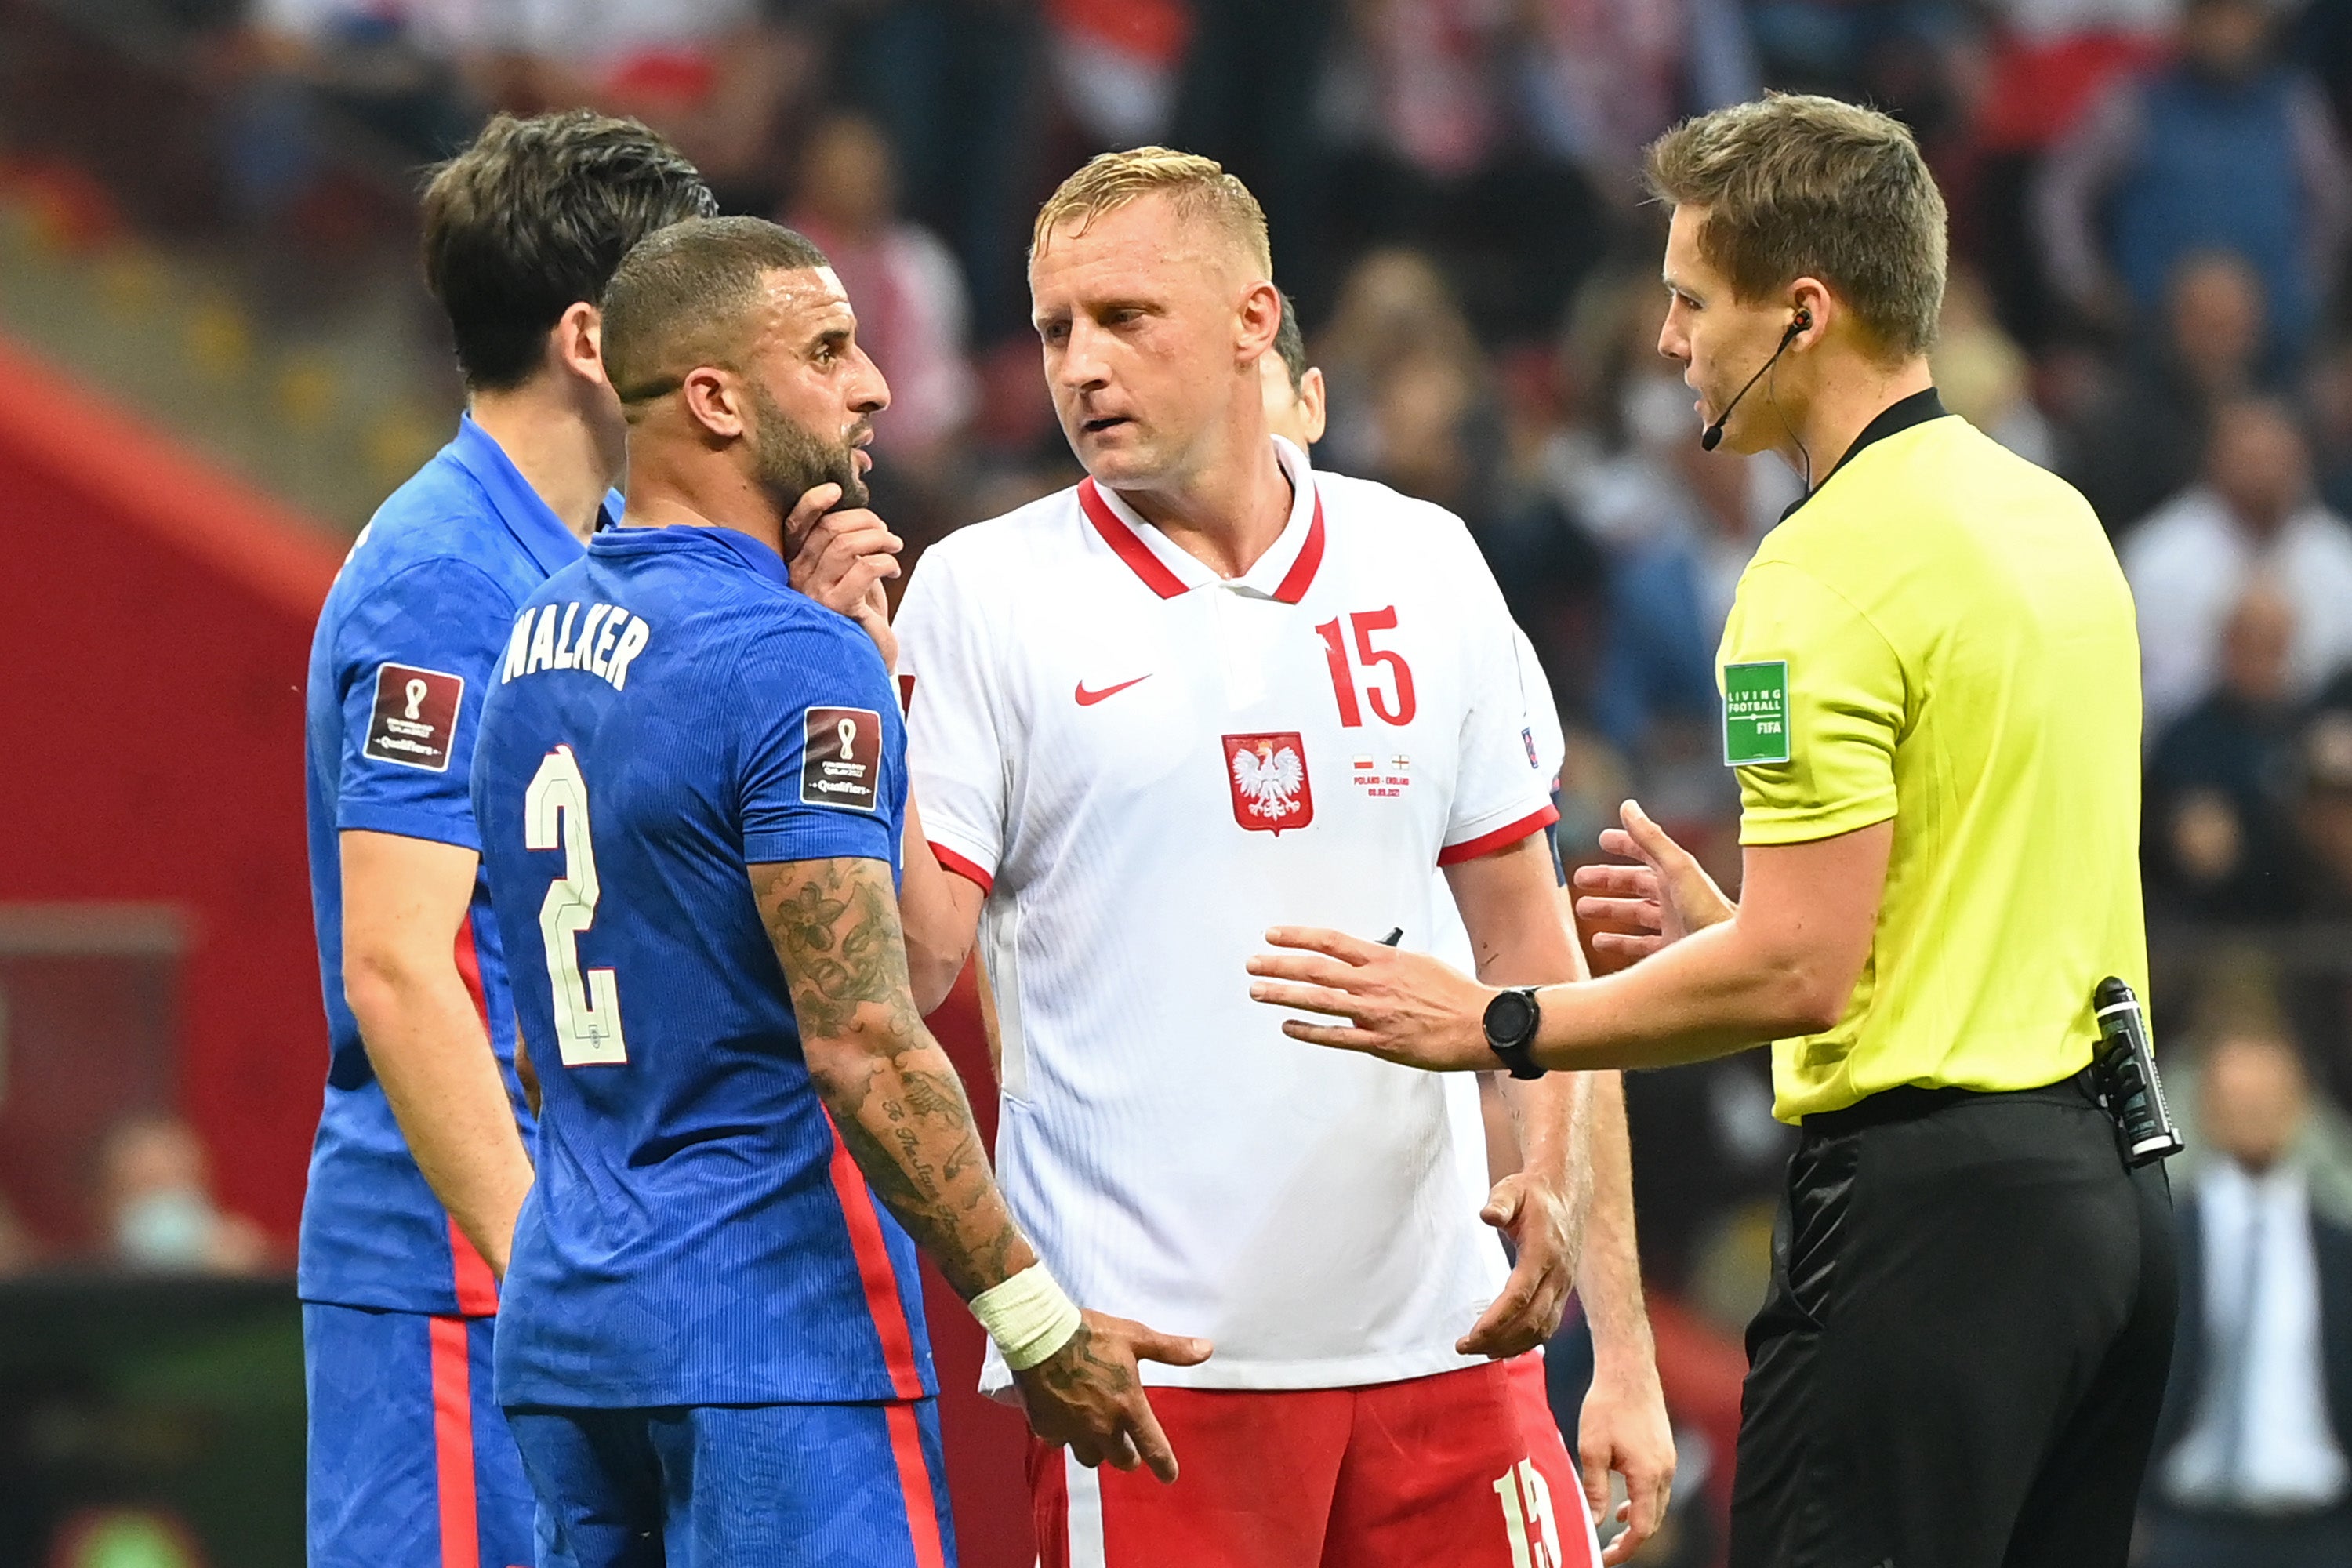 Kyle Walker and Kamil Glik were involved in an incident on Wednesday